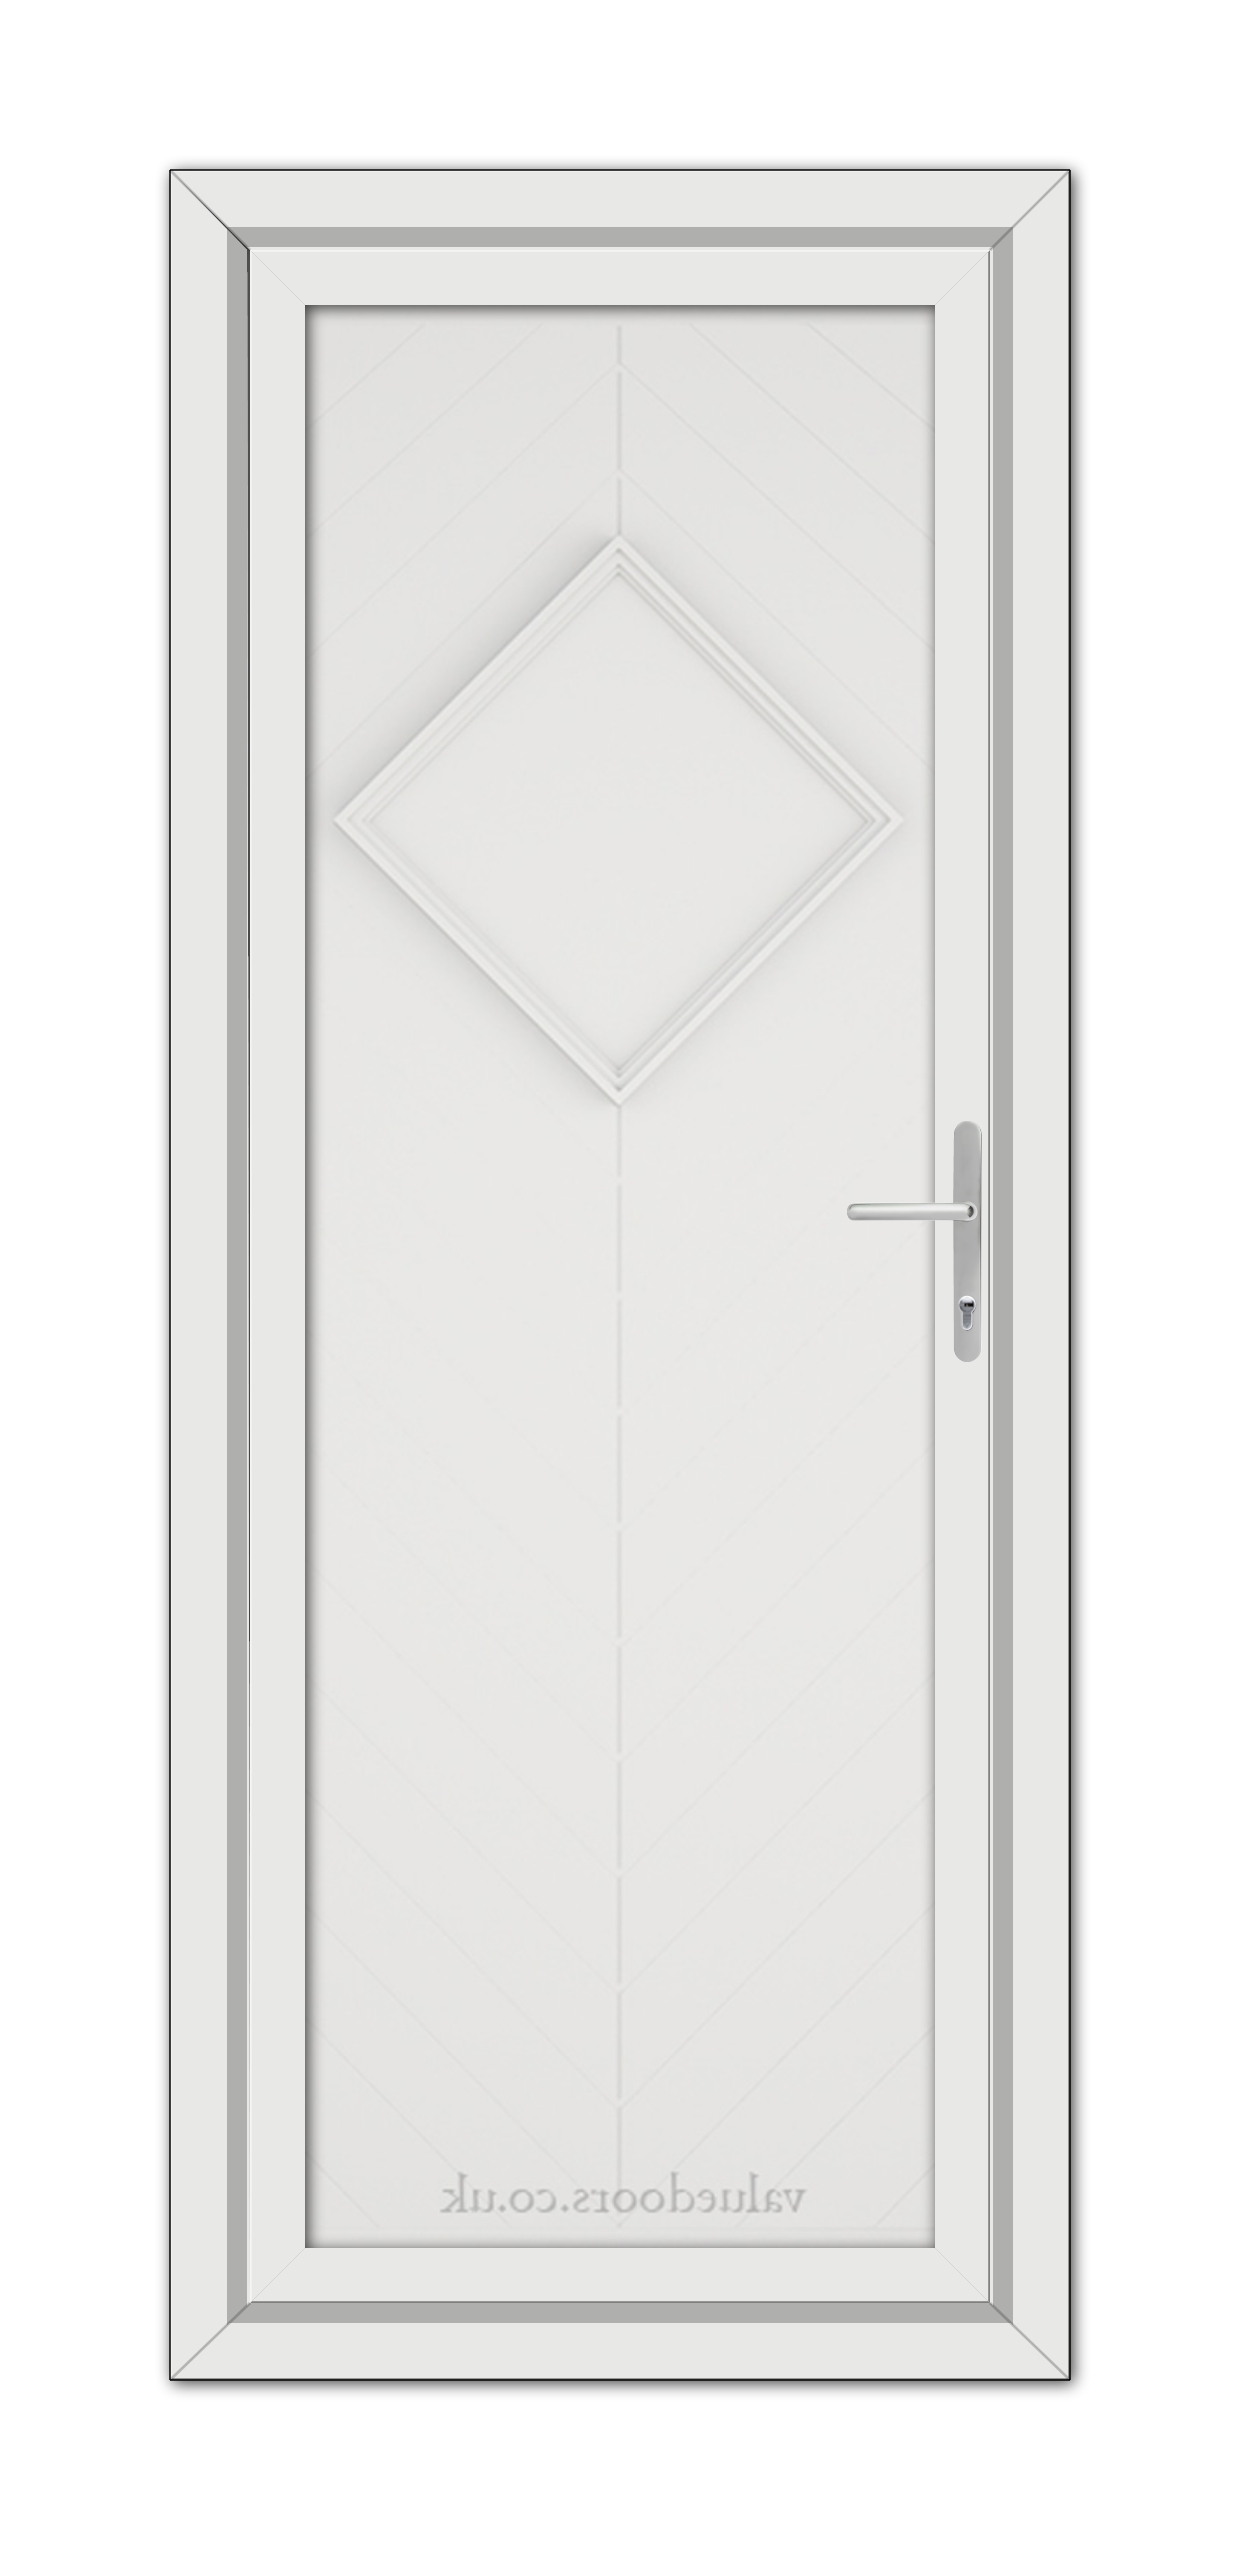 A vertical image of a closed White Hamburg Solid uPVC Door with a diamond-shaped window and a metallic handle, set within a simple frame.